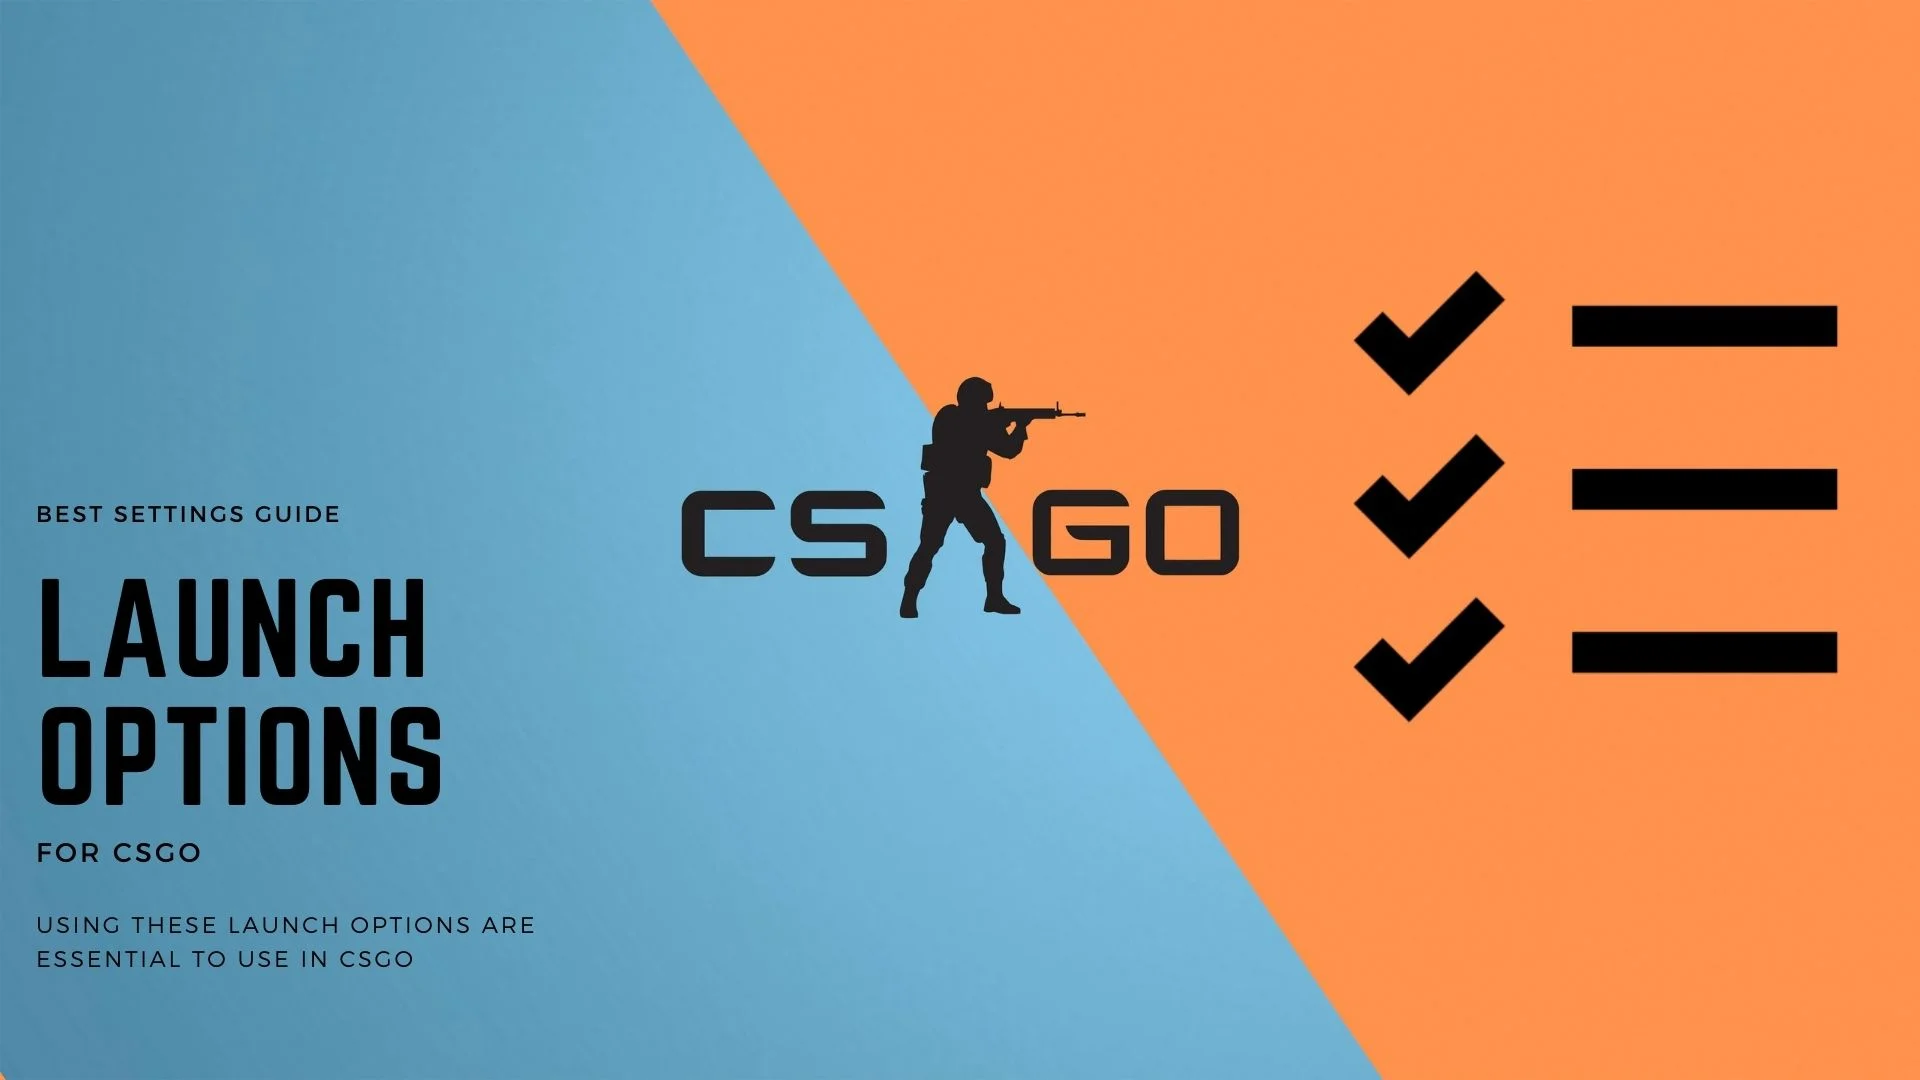 Launch Options for CSGO